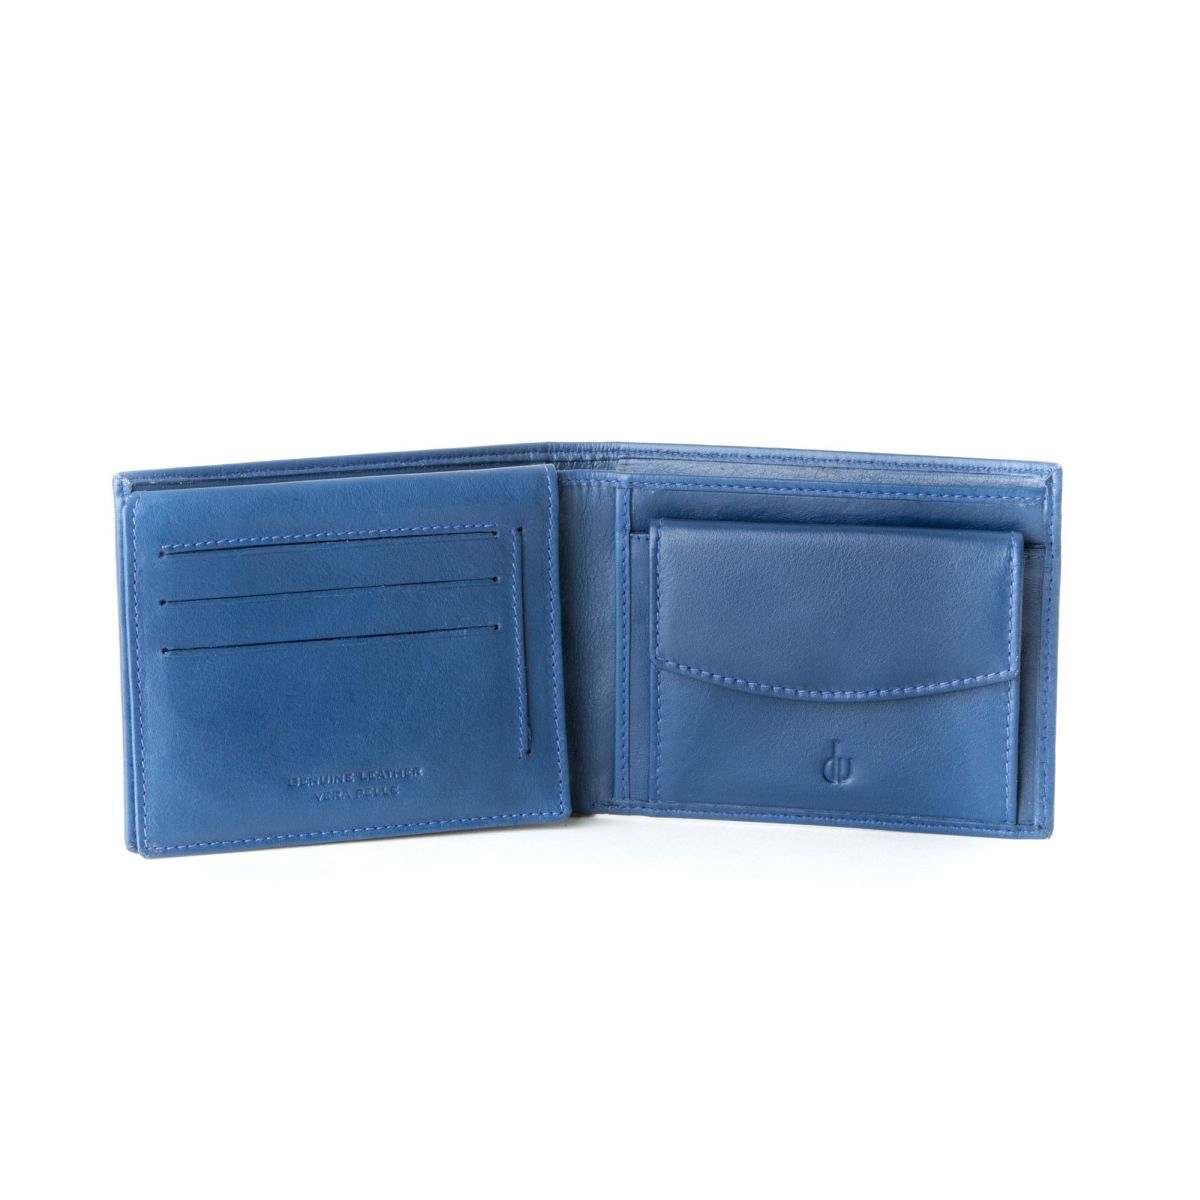 DuDu Leather classic multi color wallet with coin purse and inside flap -  Blue